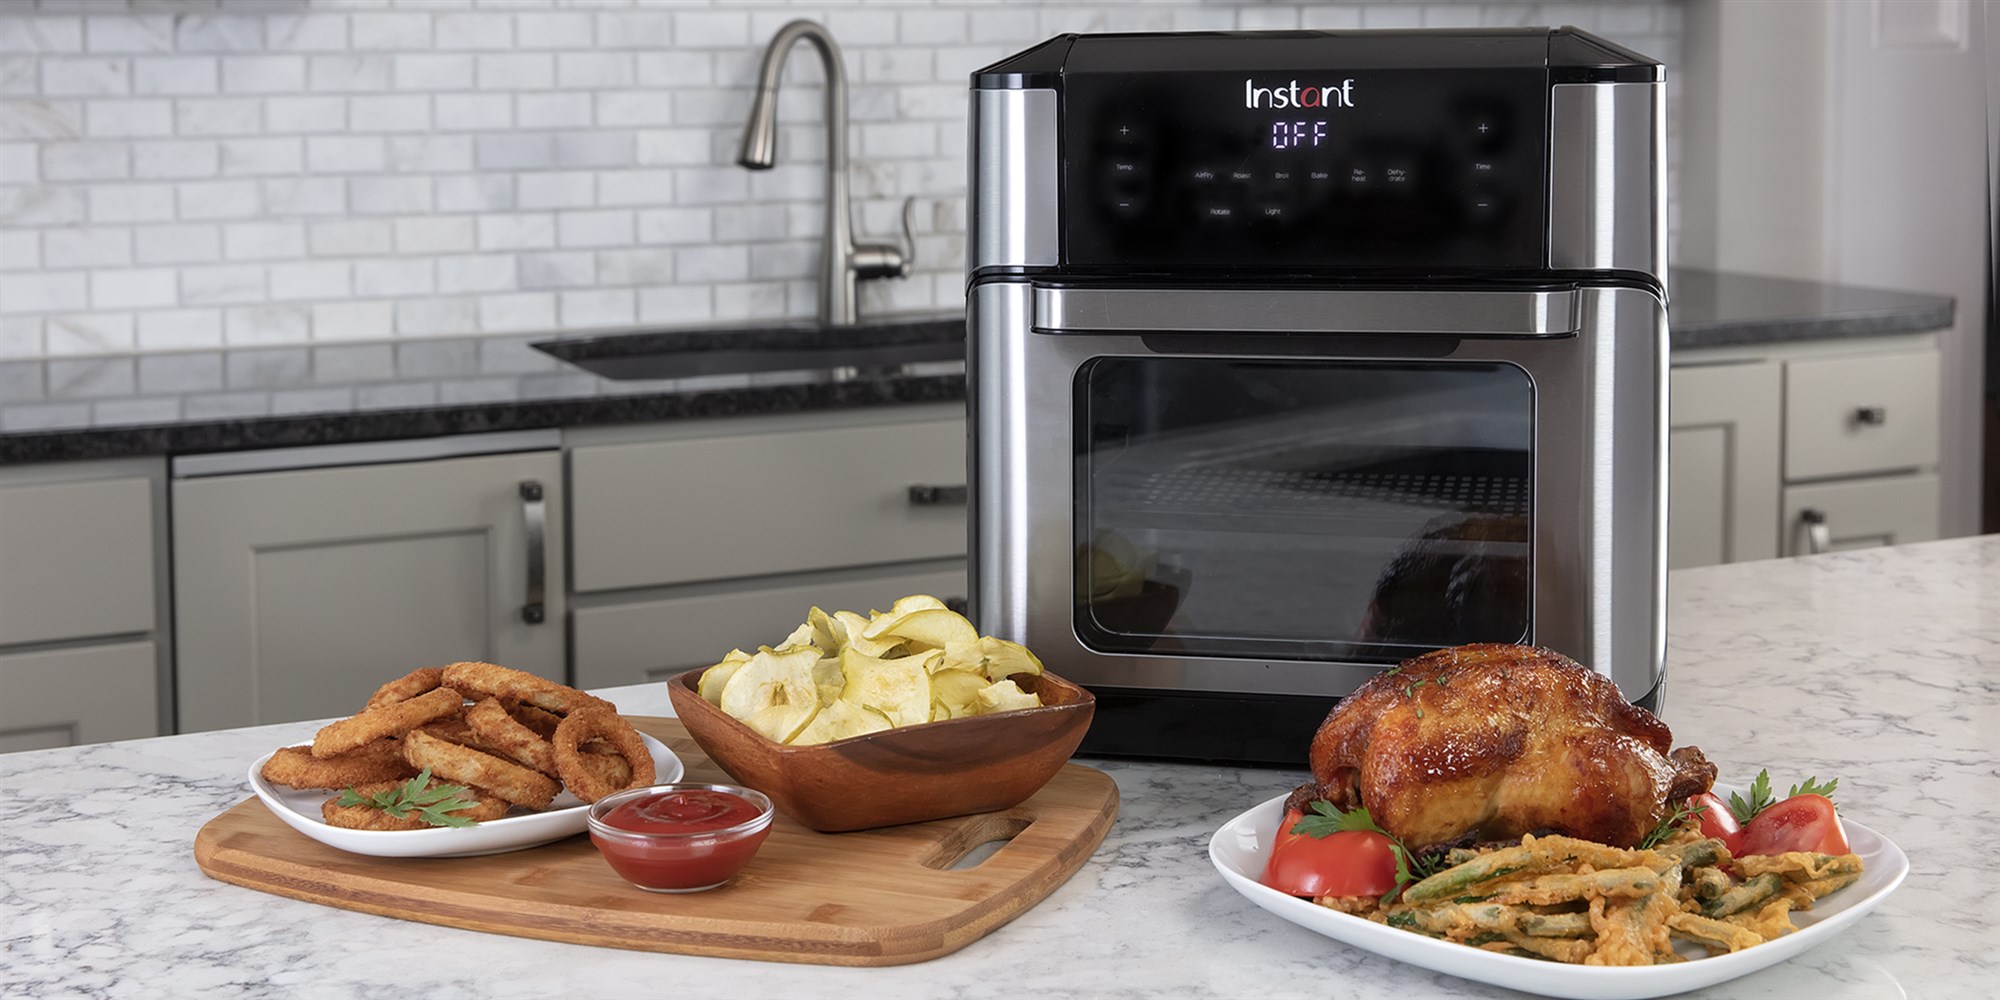 Does The Full-Size Oven Have a Place in the Modern Home?